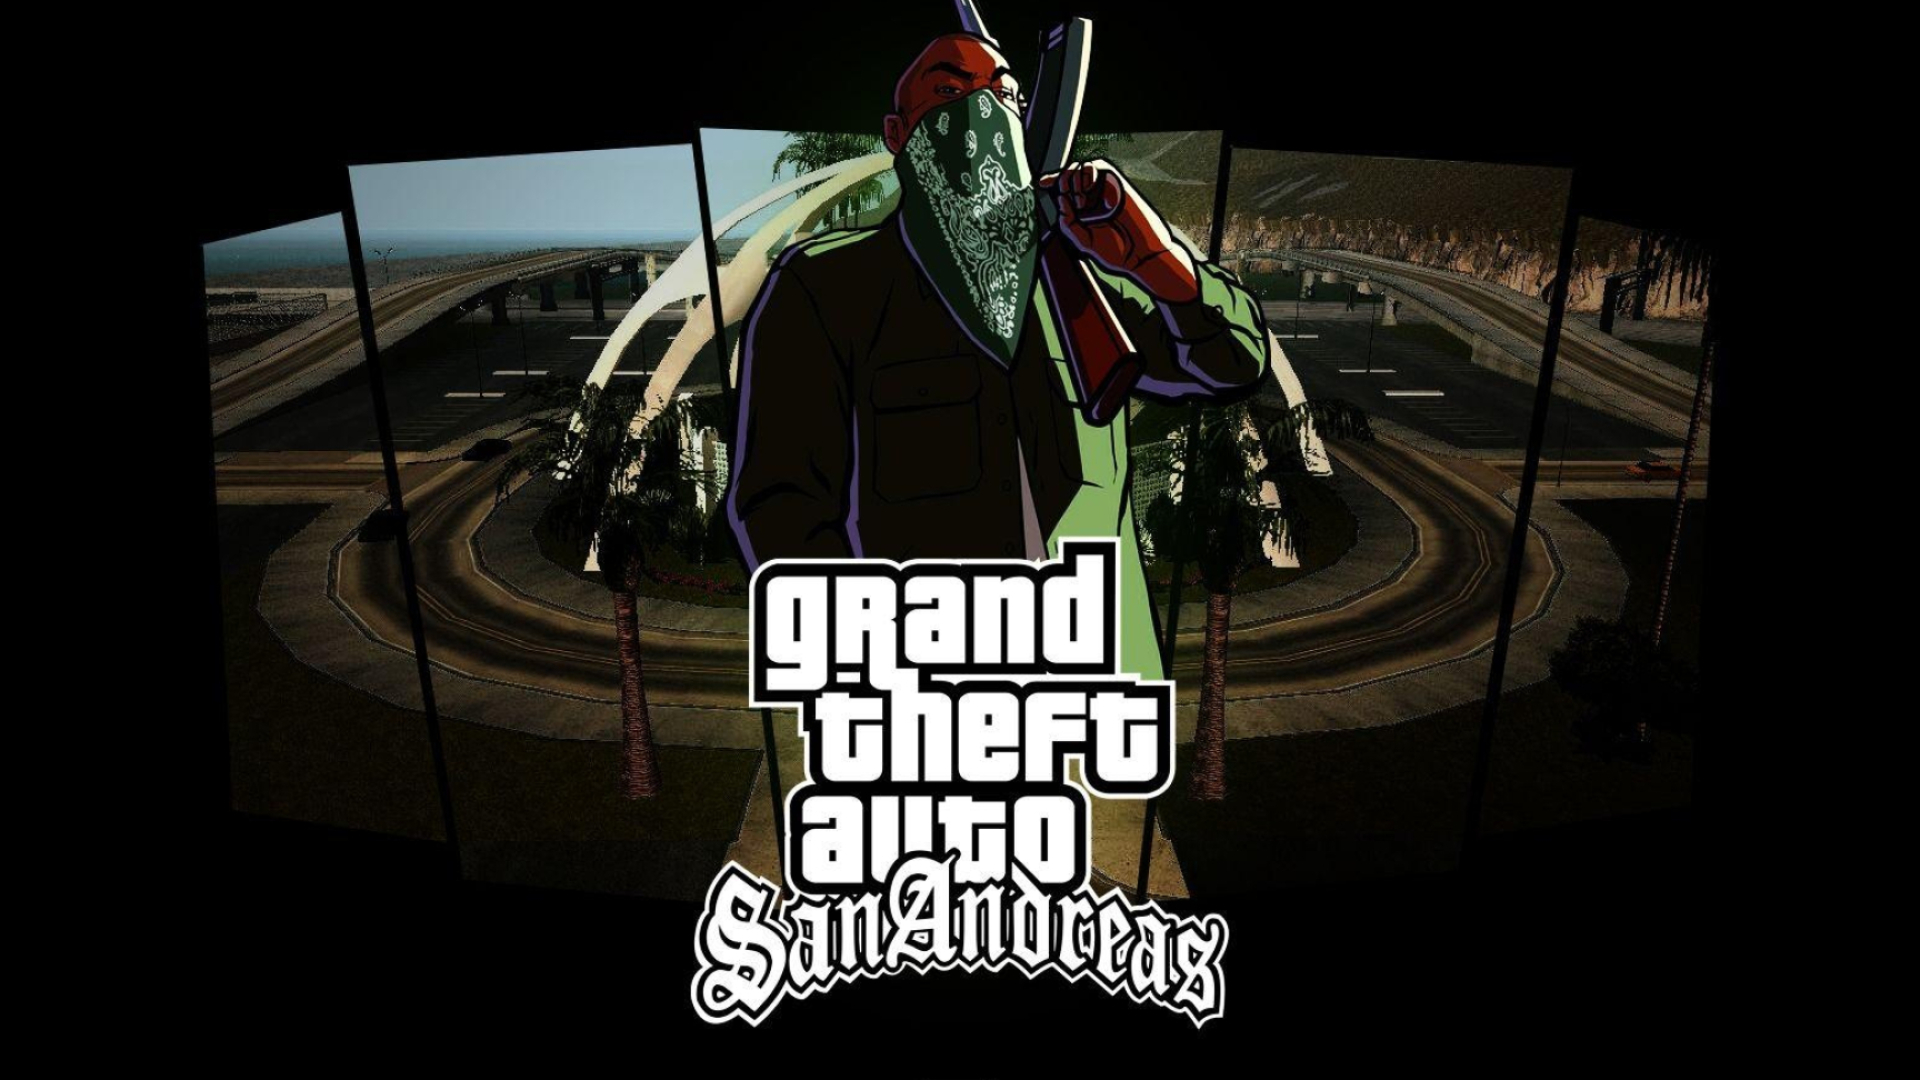 Grand Theft Auto: San Andreas HD Wallpapers 1920x1080